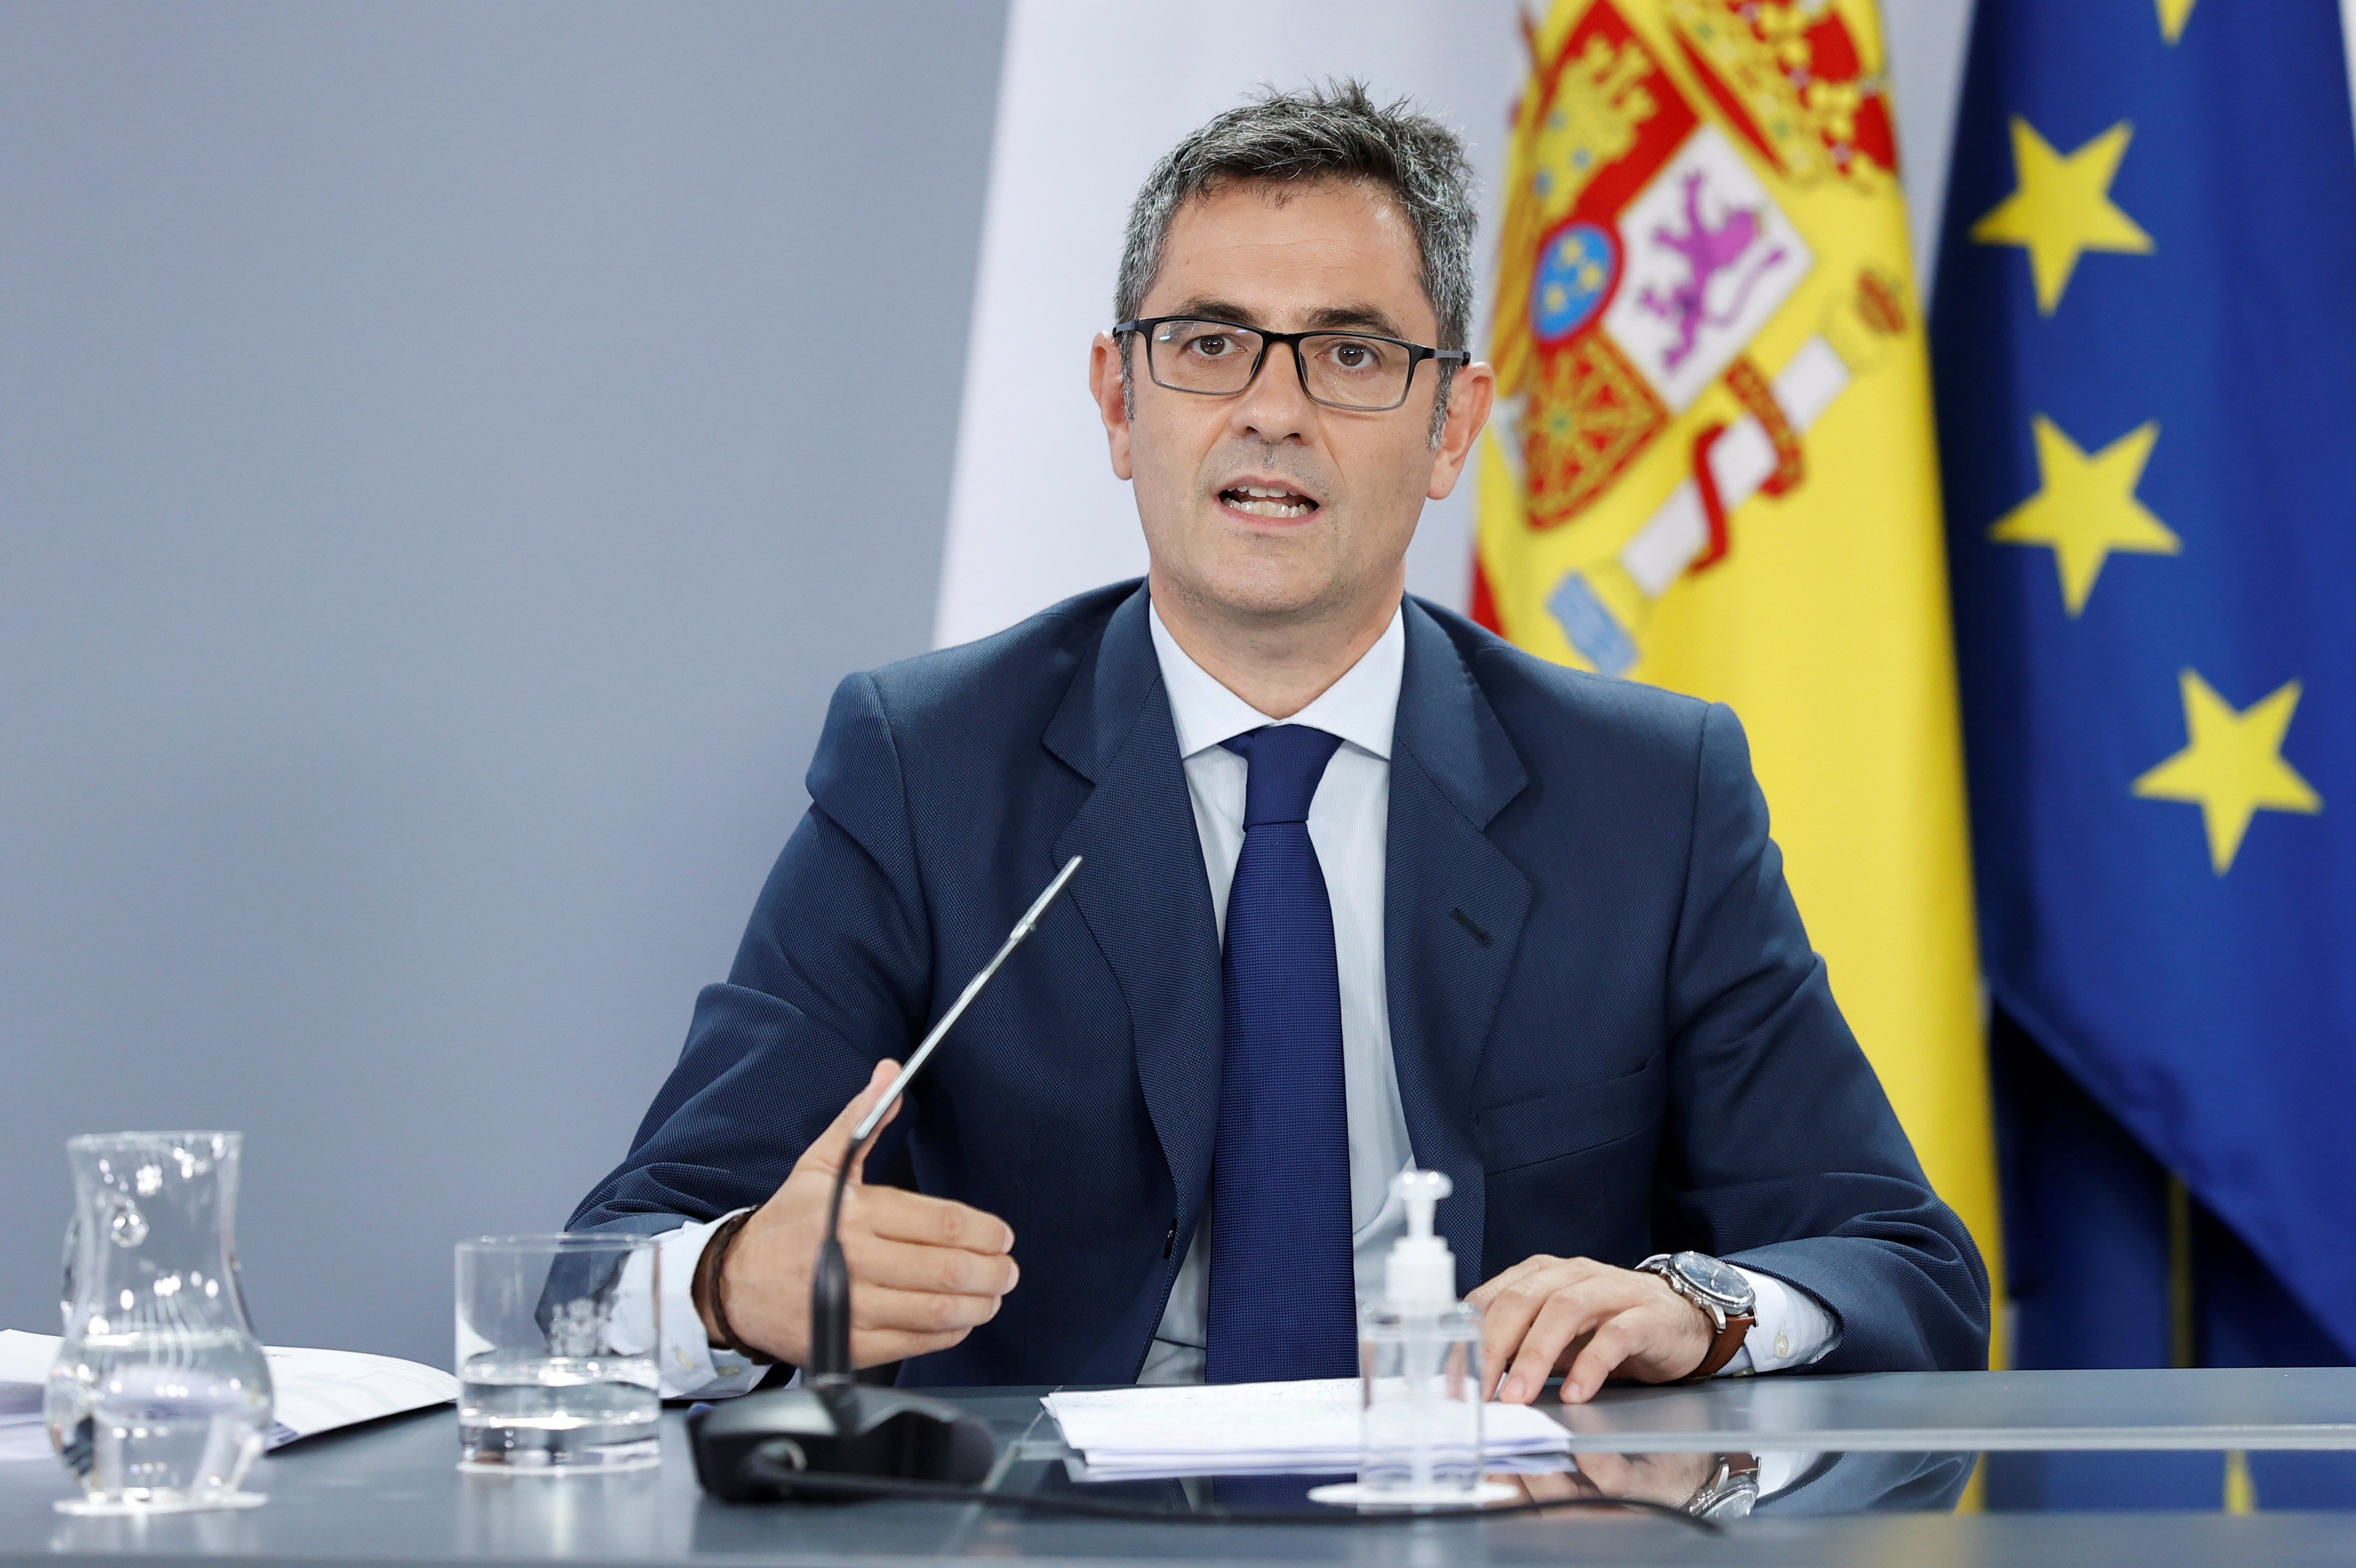 Spanish government delays reform of controversial sedition law until 2022